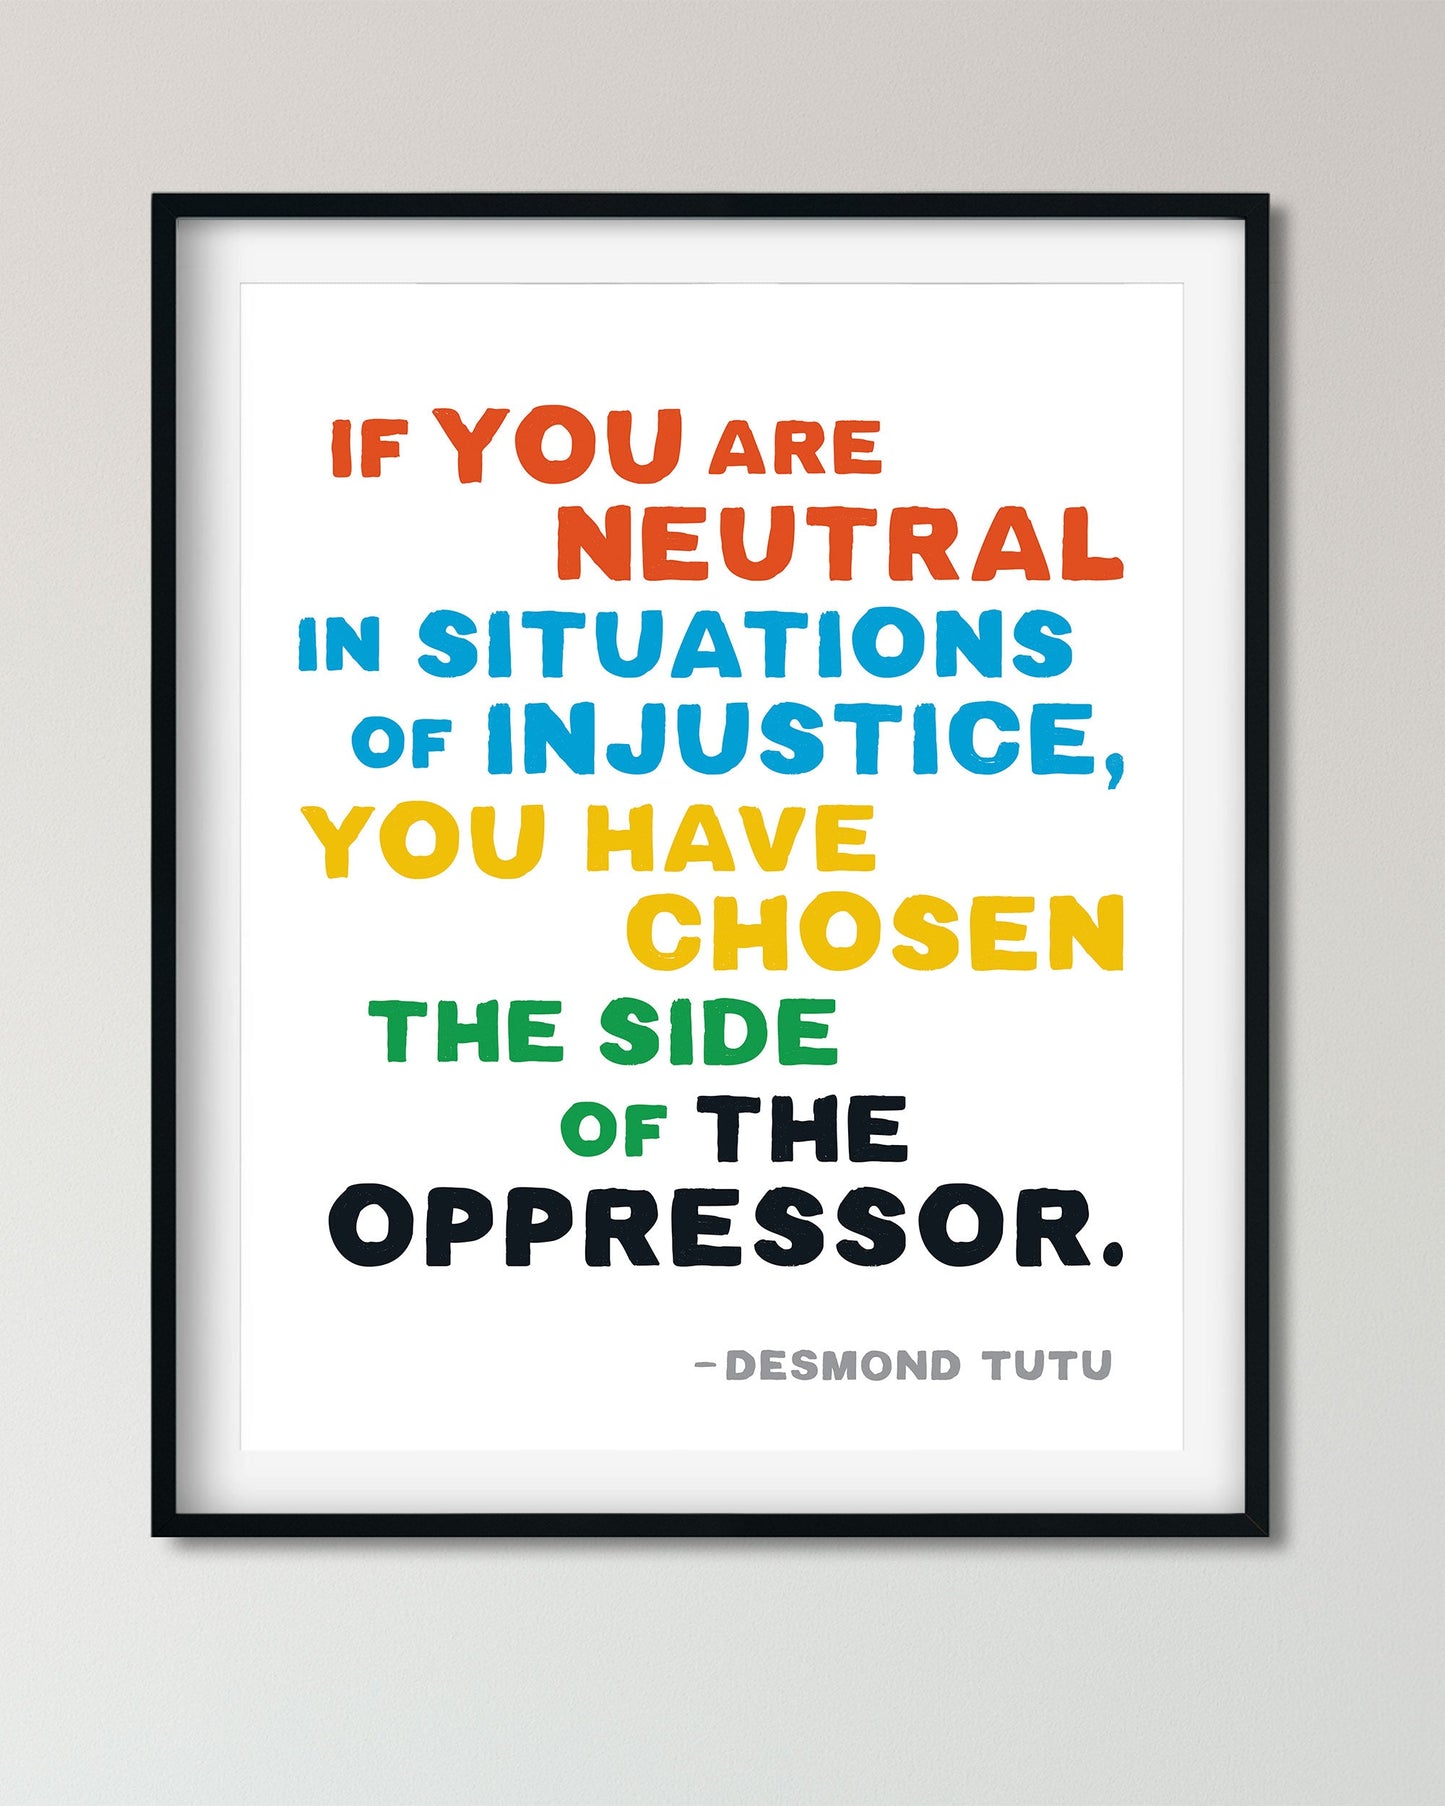 Framed Desmond Tutu Social Justice Poster art with a quote by Tutu - Transit Design